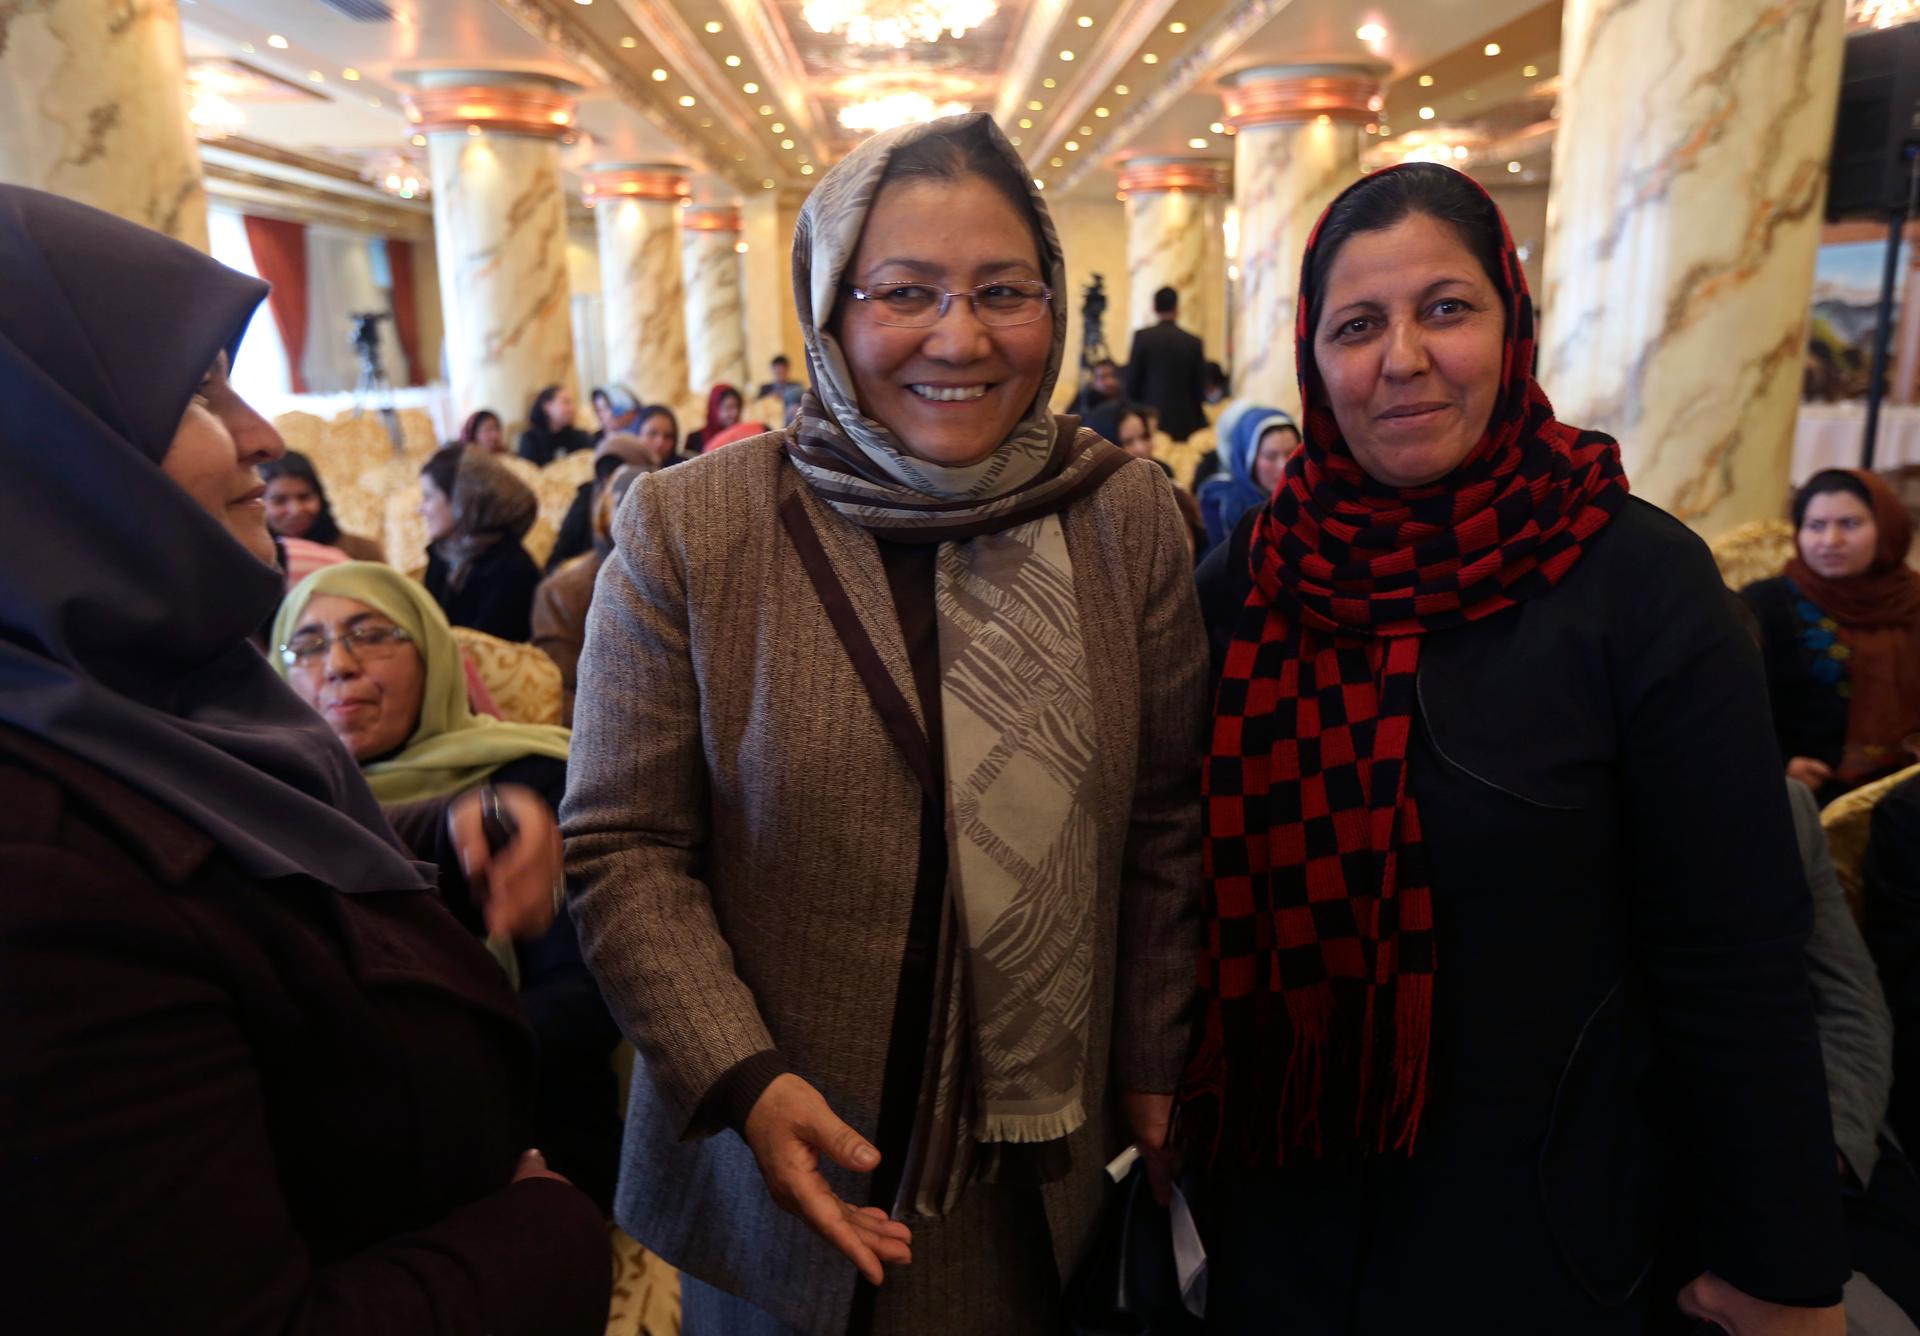 Three women wearing headscarves stand together and the one in the middle, wearing glasses, smiles.